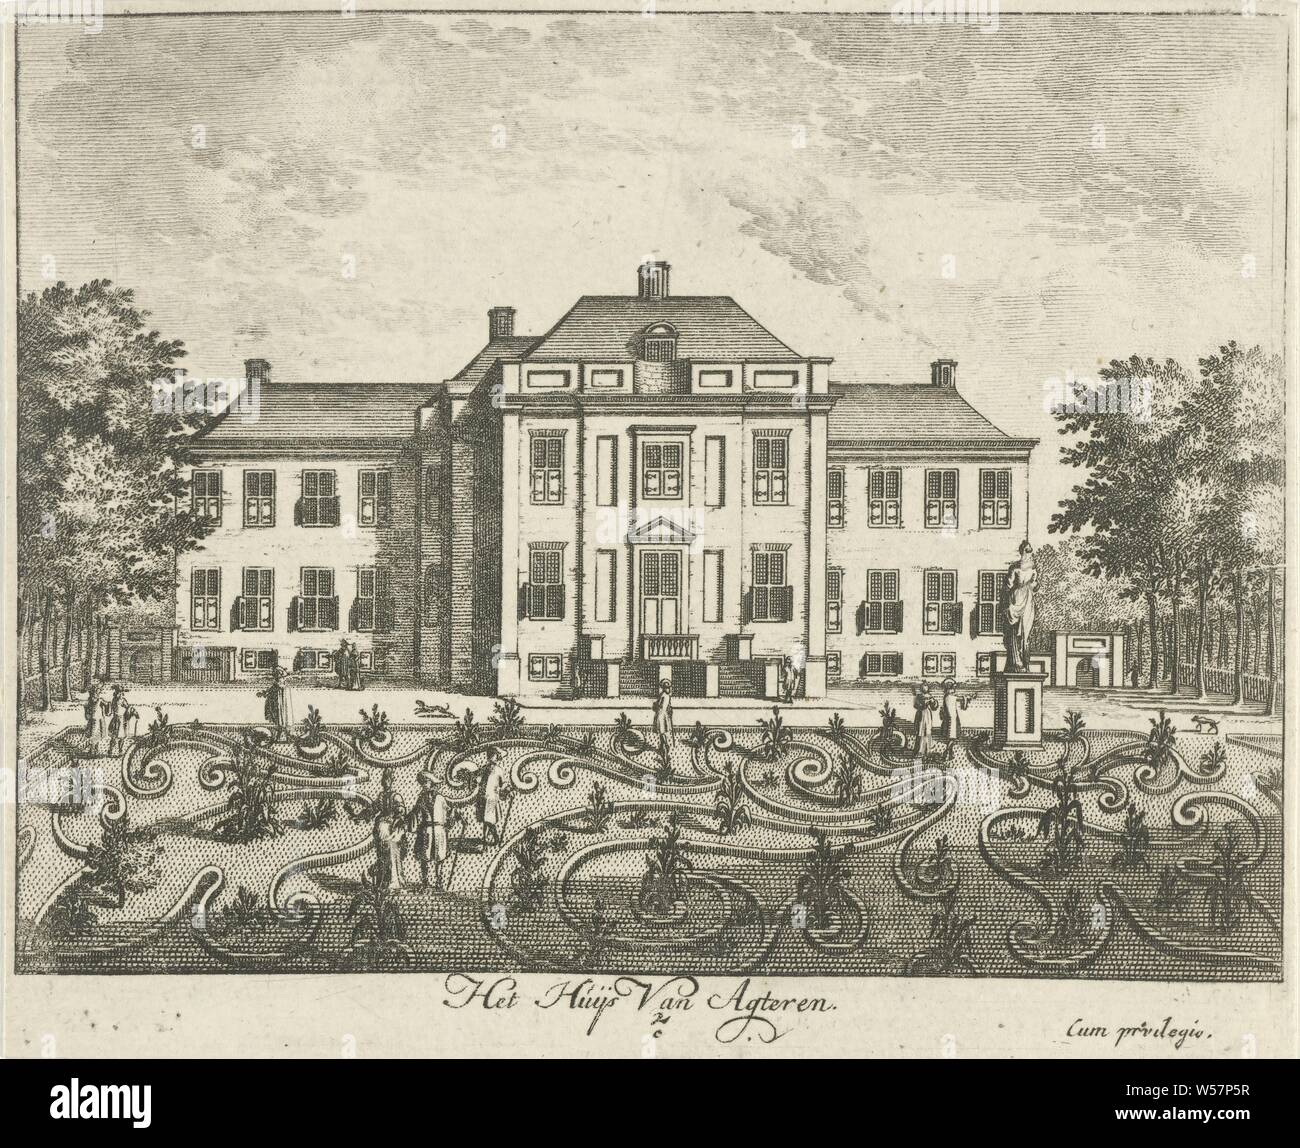 Rear facade of Soestdijk Palace The Huijs Van Agteren (title on object) General Image Vant Lust-Huijs and Hof van sijn Royal Majesty of Great Britain t Soest-Dijk (series title), View of the rear facade of Soestdijk Palace with walking figures in the landscaped garden. The print is part of a series with sixteen faces on Soestdijk Palace and the accompanying estate, palace, French or architectonic garden, formal garden, Soestdijk Palace, Hendrik de Leth, 1725 - 1747, paper, etching, h 131 mm × w 160 mm Stock Photo